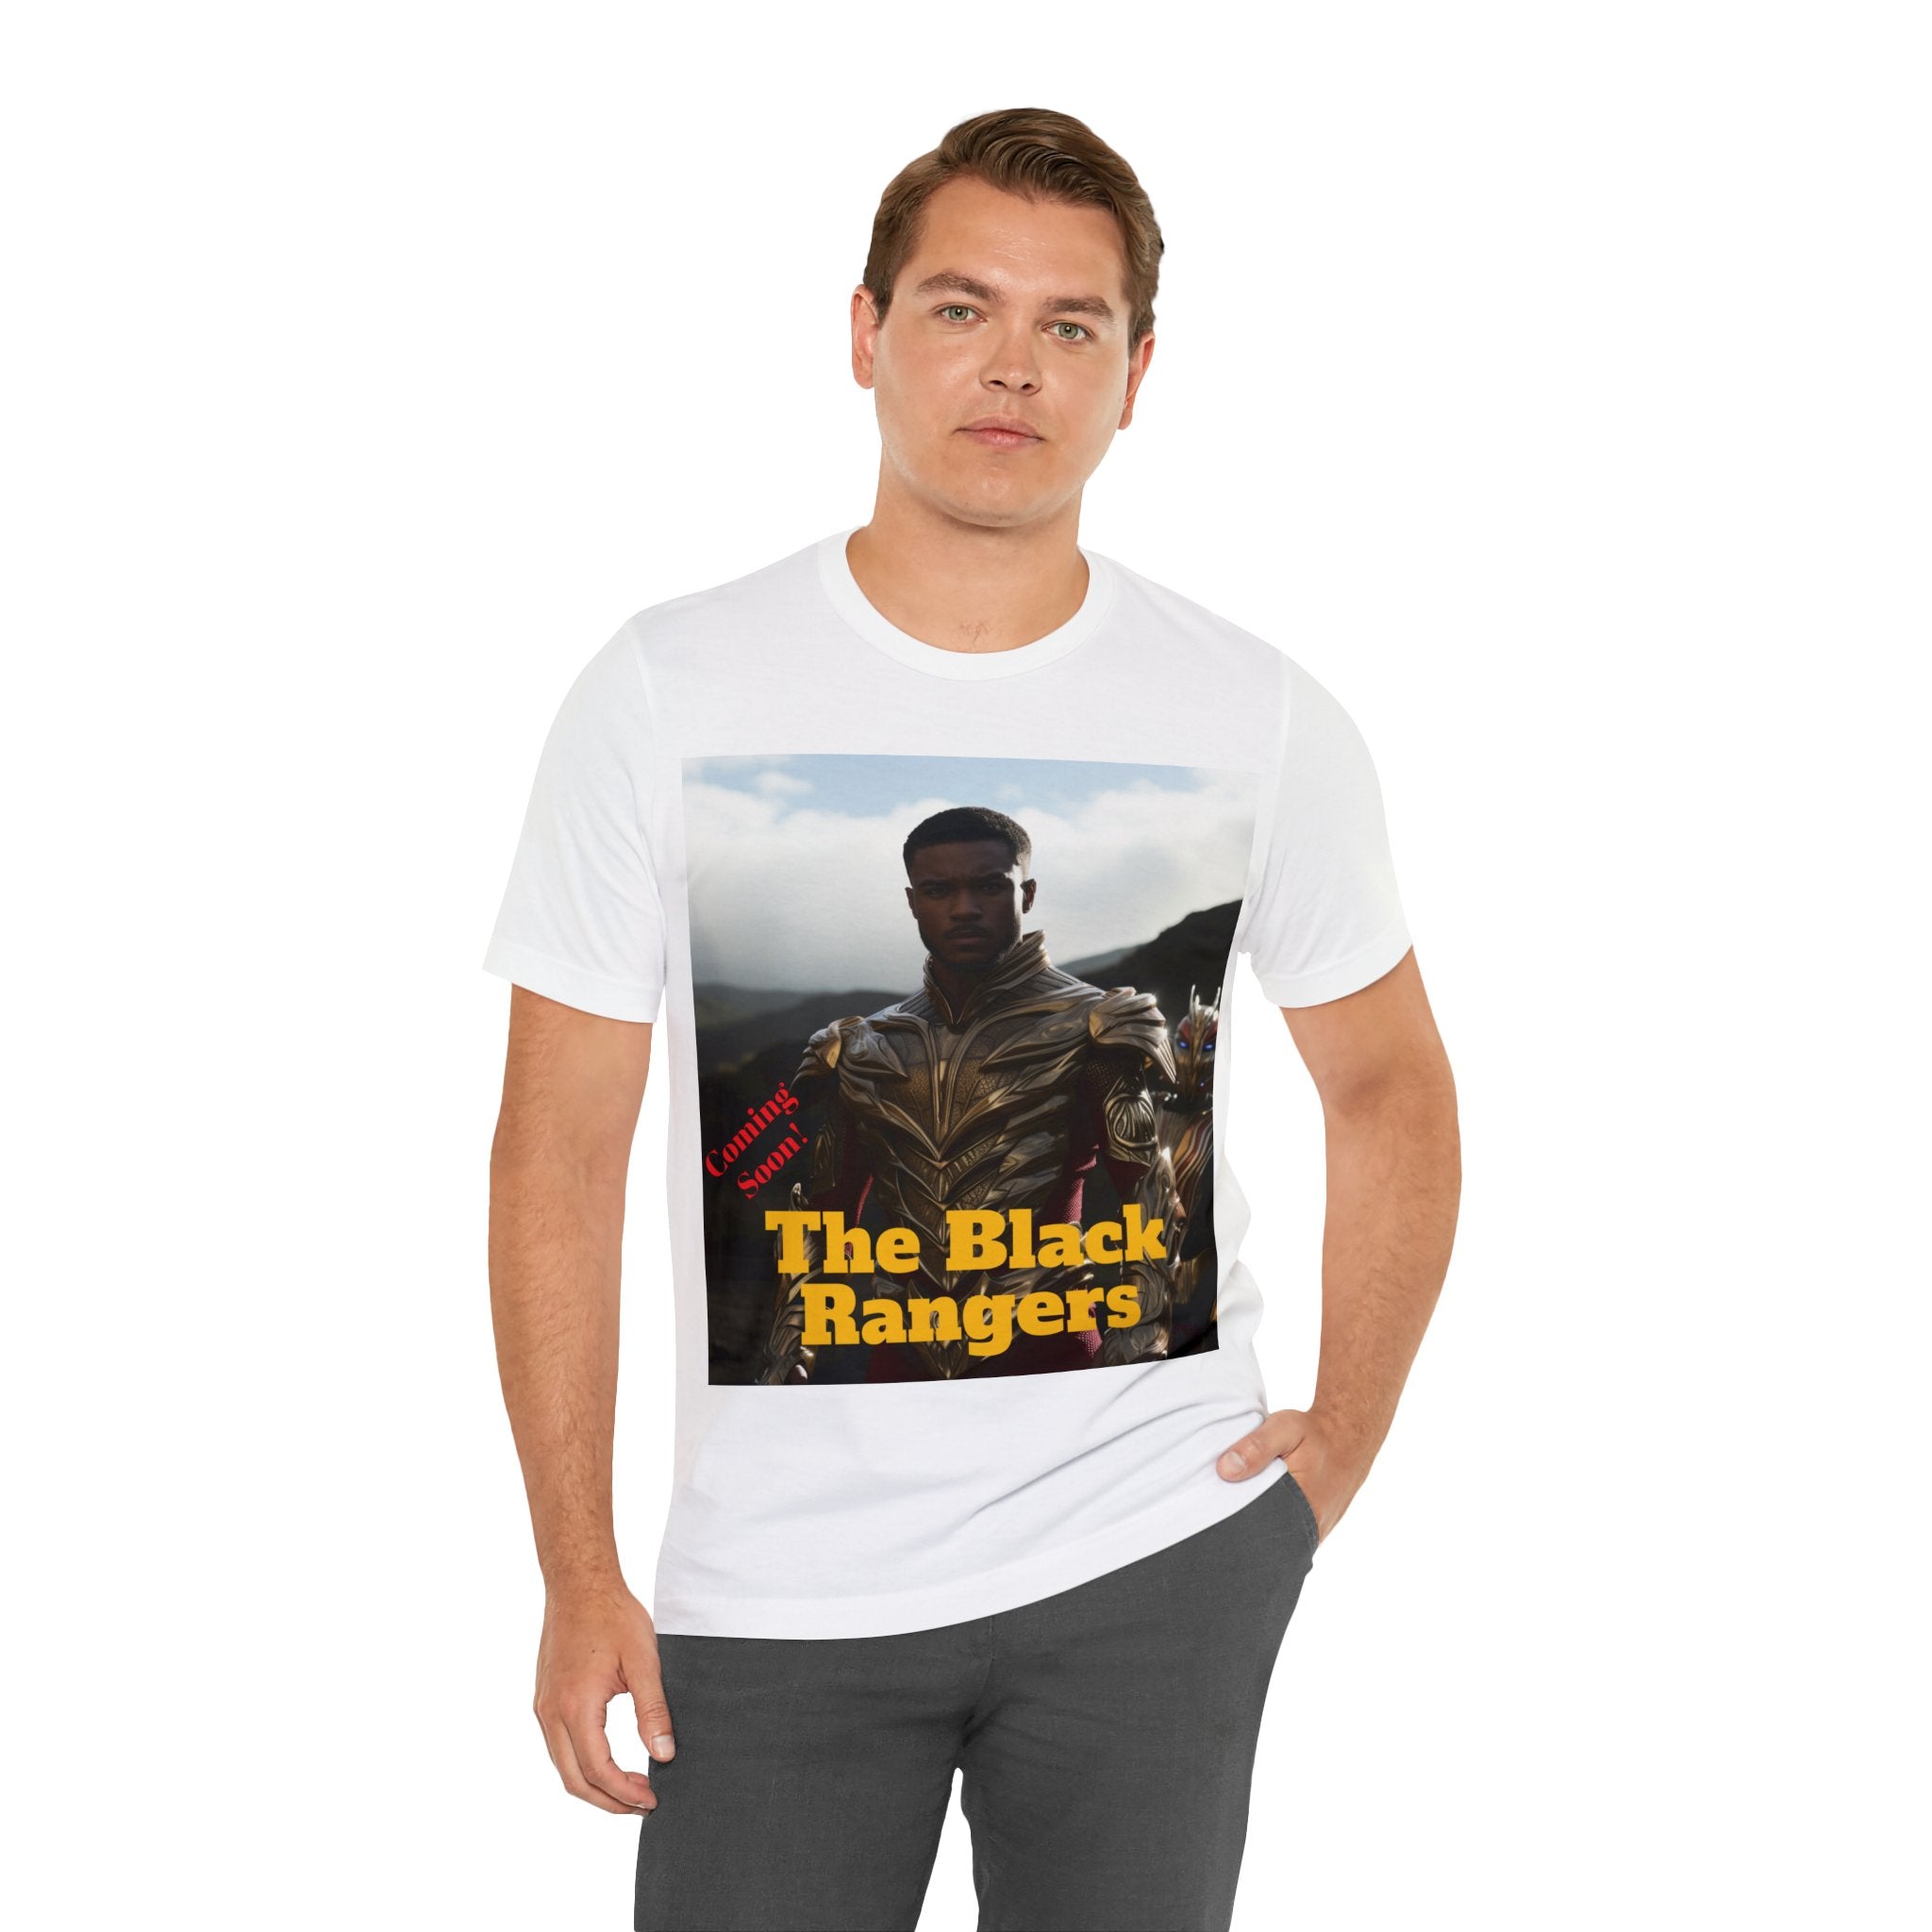 "The Black Rangers: Afro-American Excellence - Retro Inspired Unisex Jersey Short Sleeve Tee - Celebrating Diversity in Heroic Style"